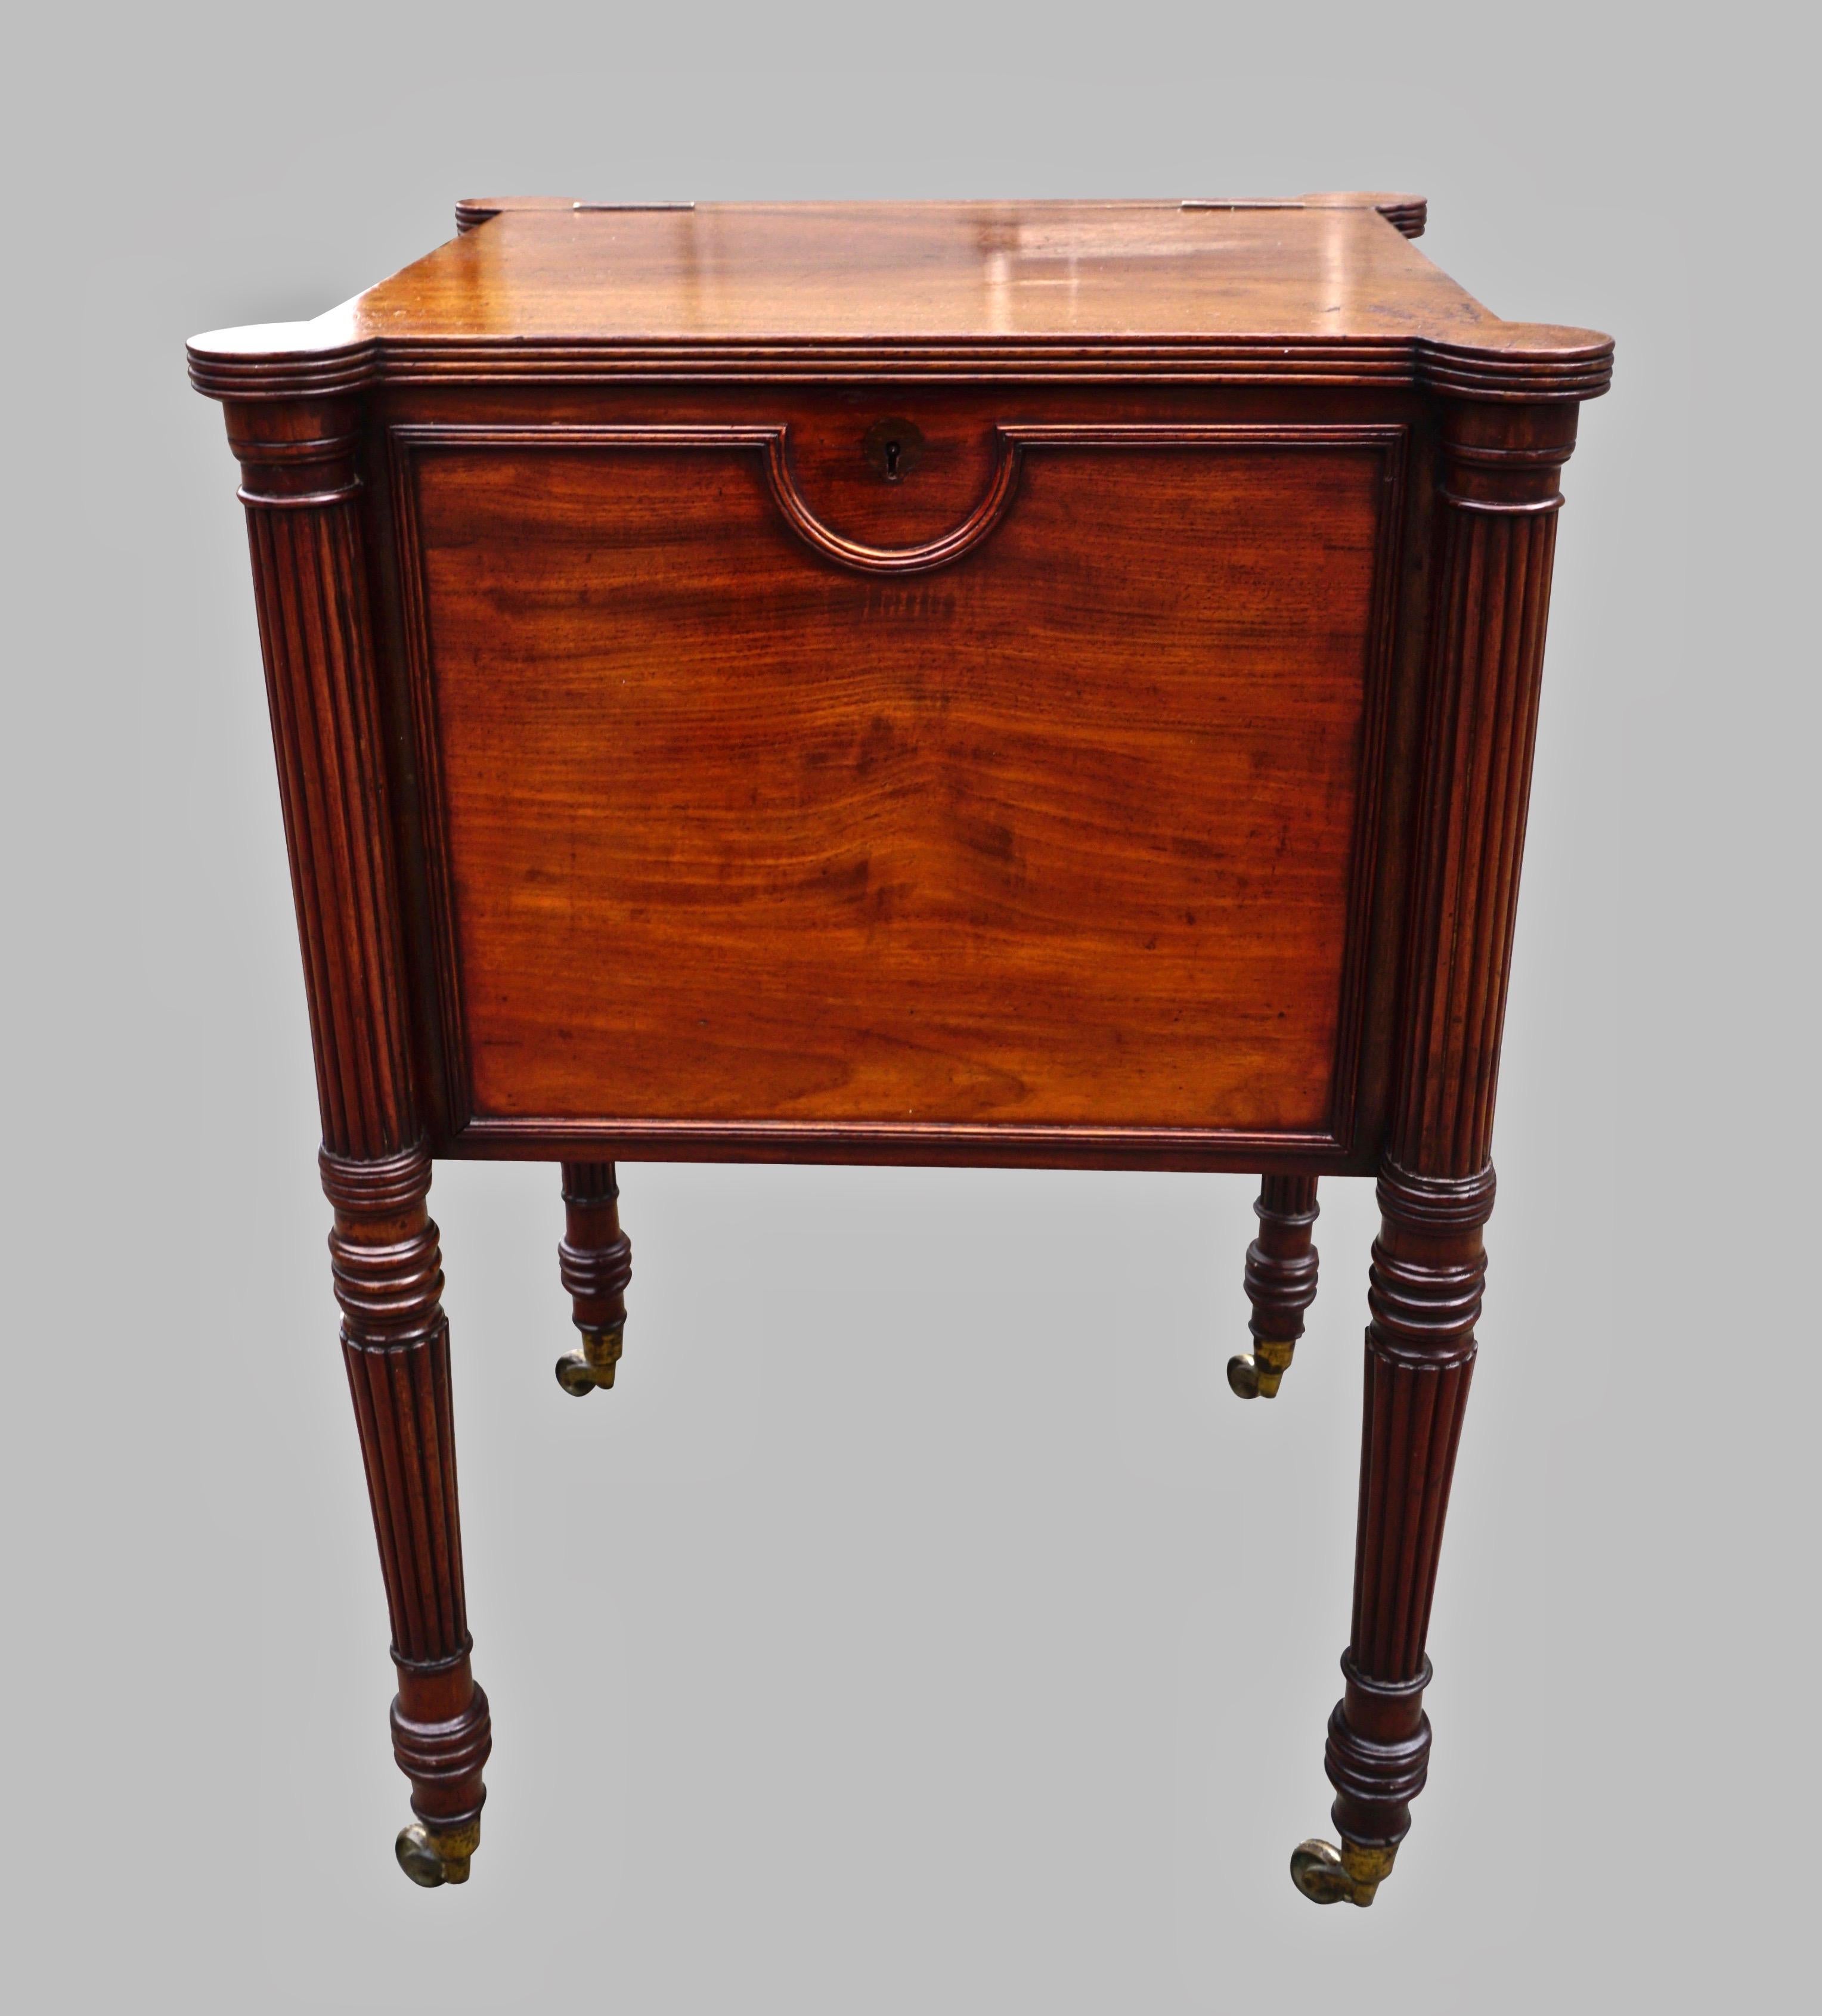 English Regency Period Mahogany Cellarette in the Manner of Gillows 8